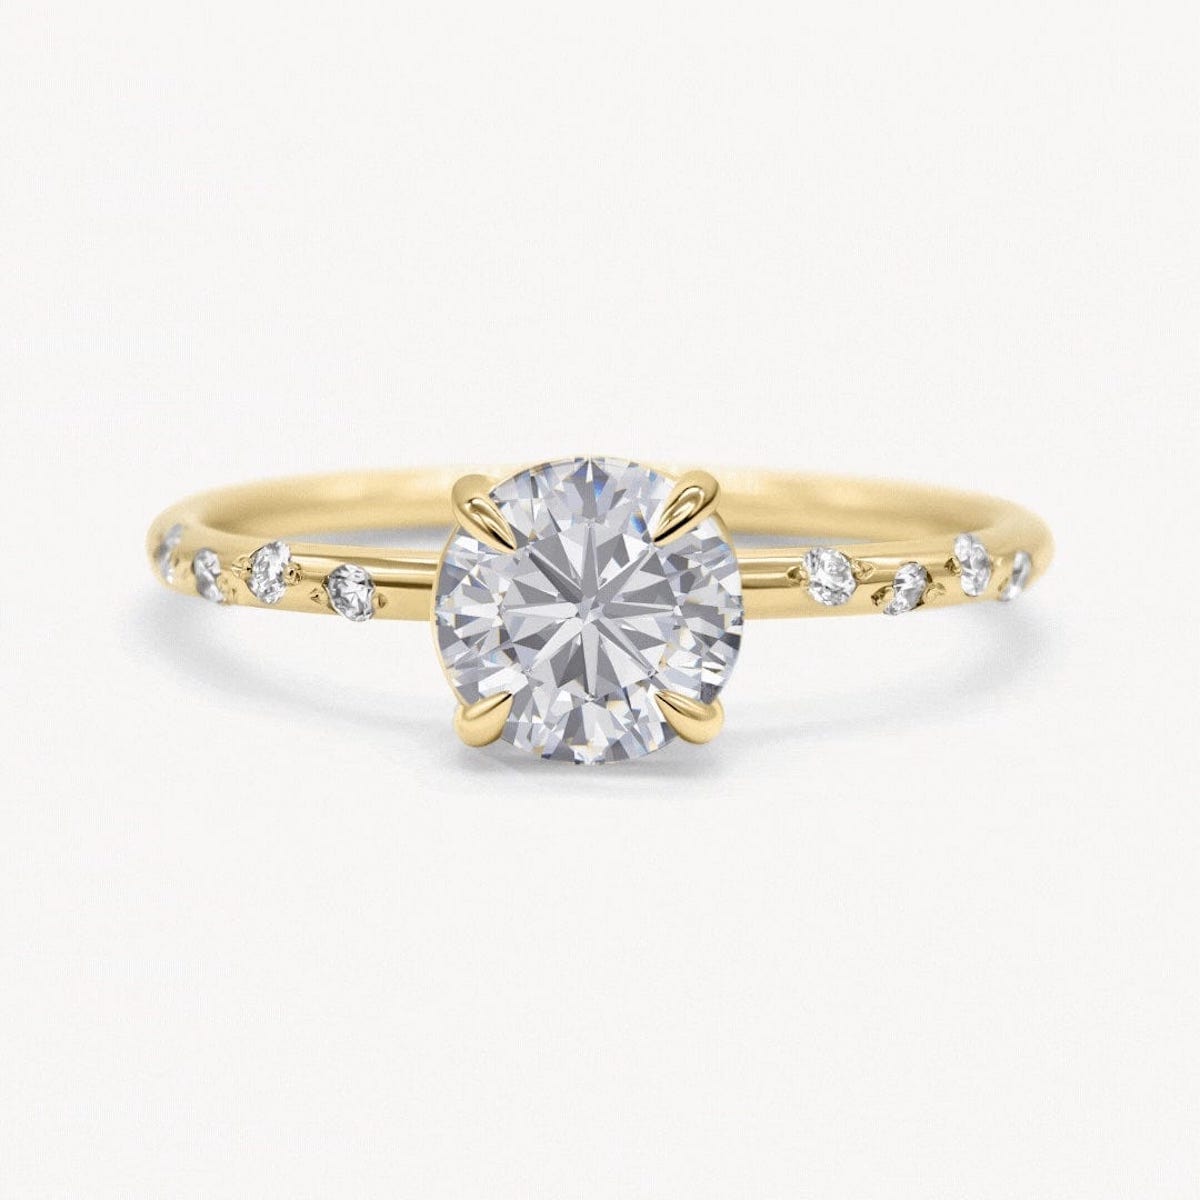 Amaryllis - White Gold Halo Engagement Ring with Round Diamond and Baguette  Diamond Accents - Dianna Rae Jewelry